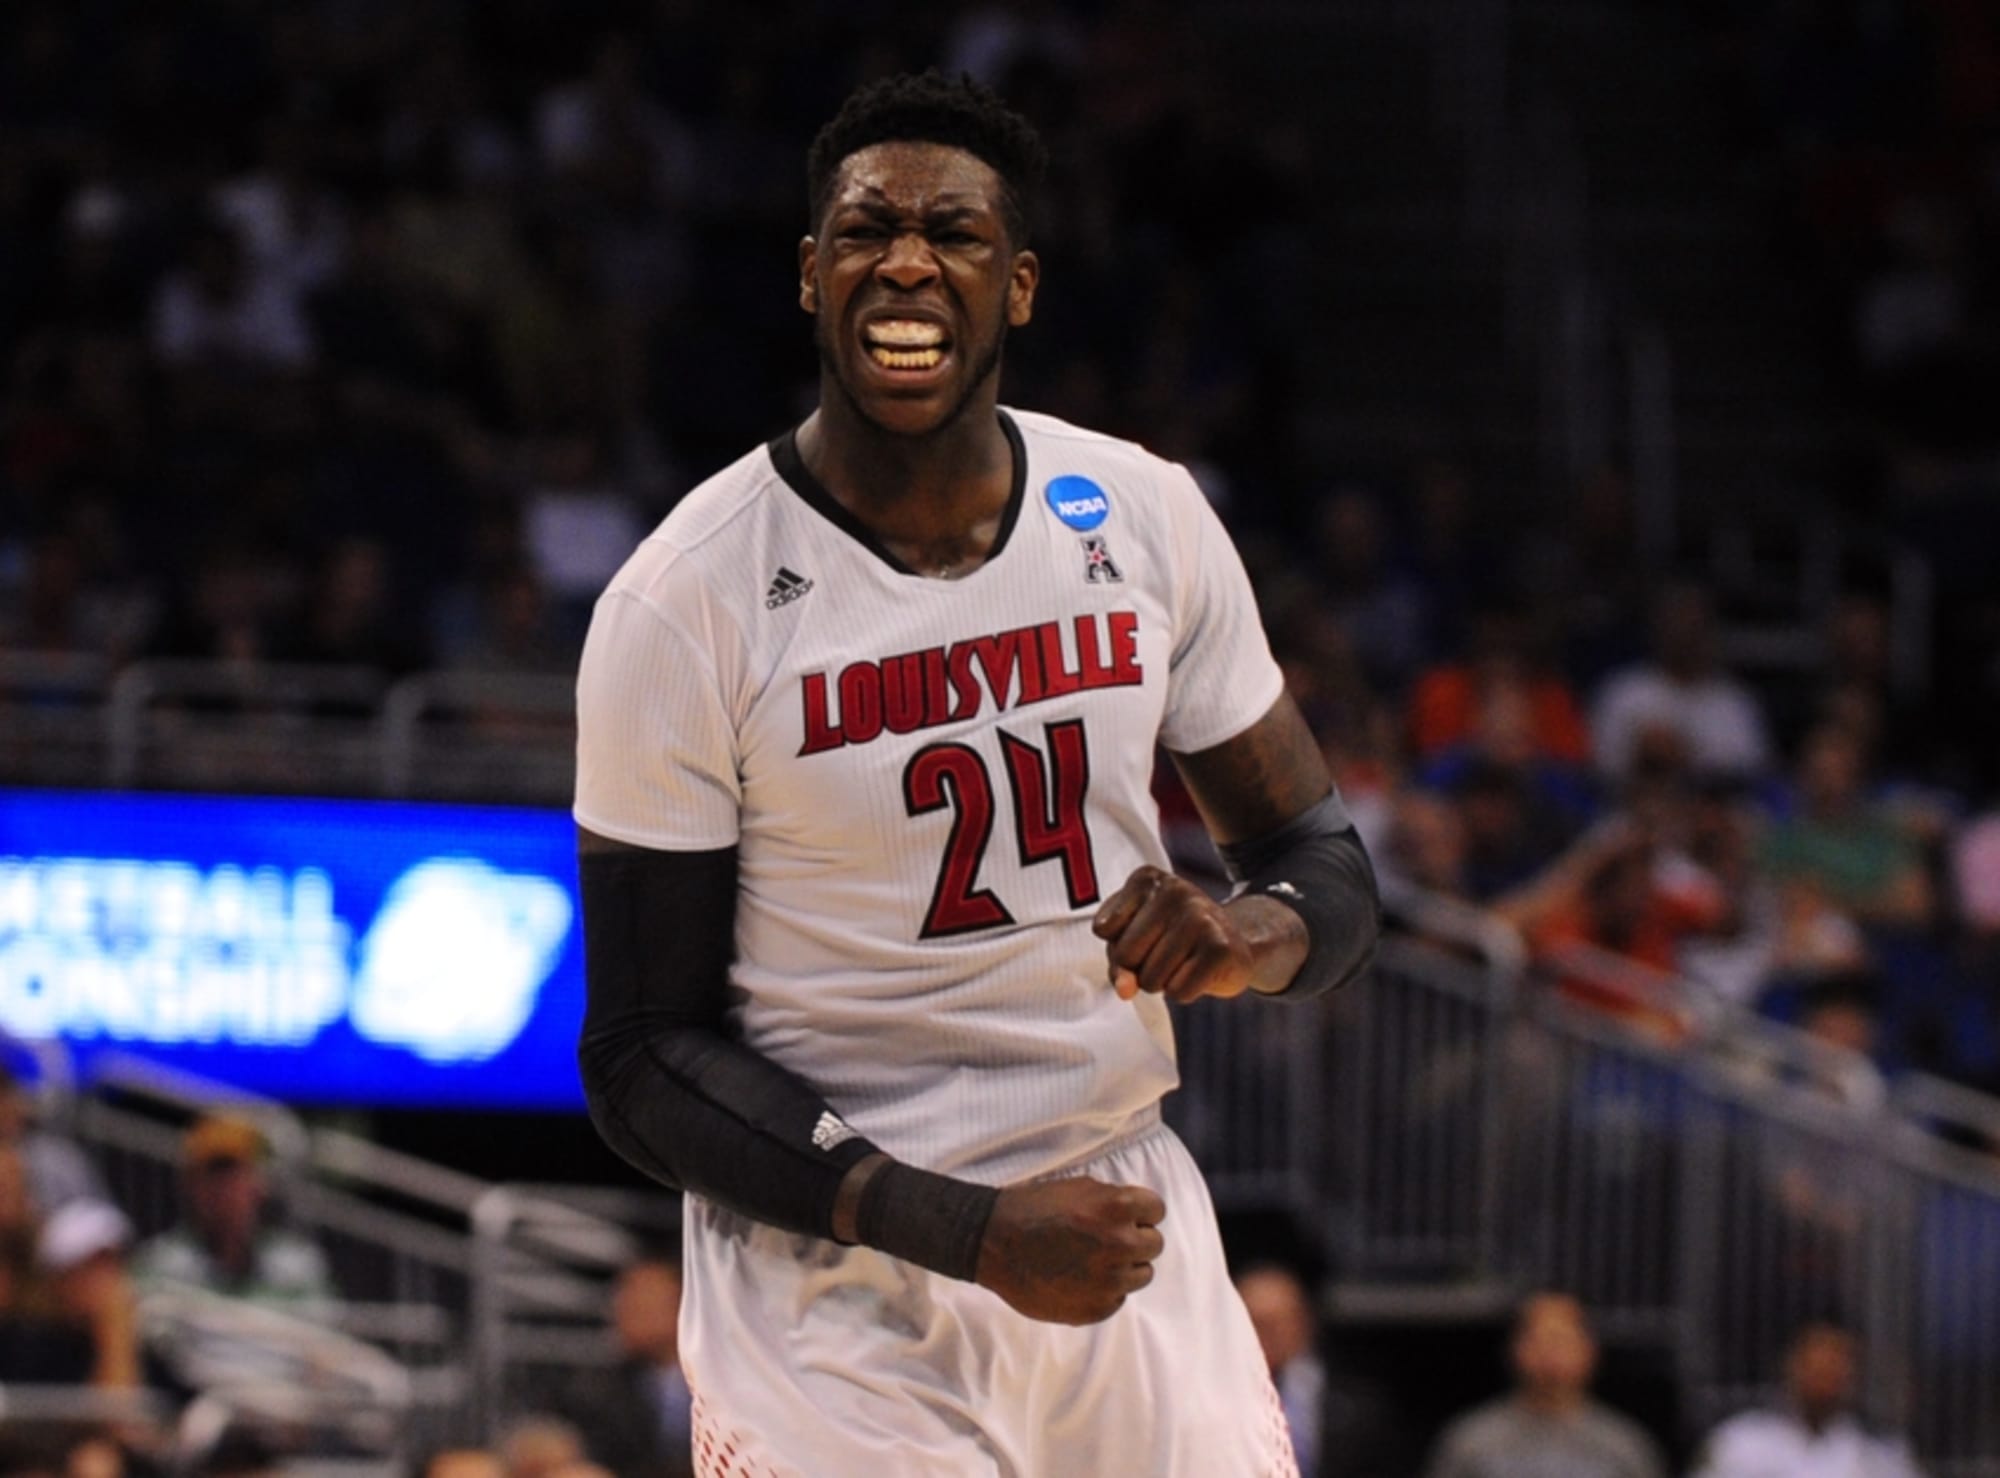 3 teams for former Louisville basketball star Montrezl Harrell to consider